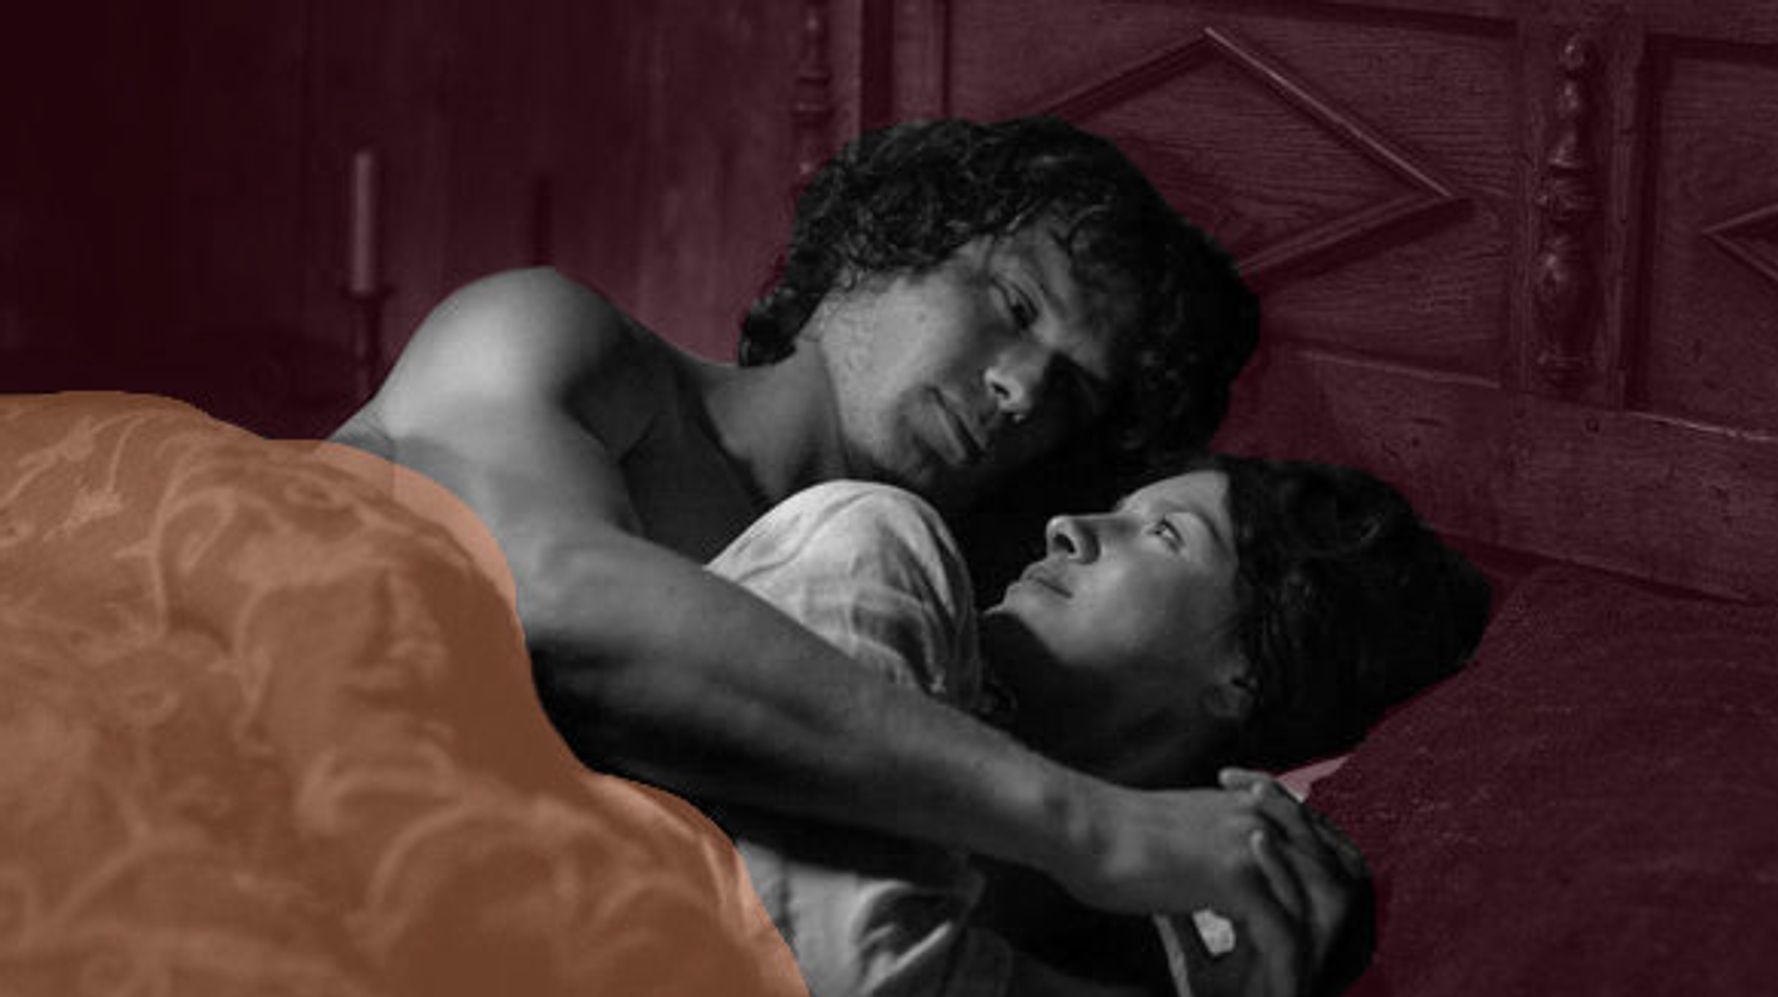 Nudist Couples Sex Close Up - Outlander' Is The Official TV Show Of Frisky Couples Who Just Want To F**k  | HuffPost